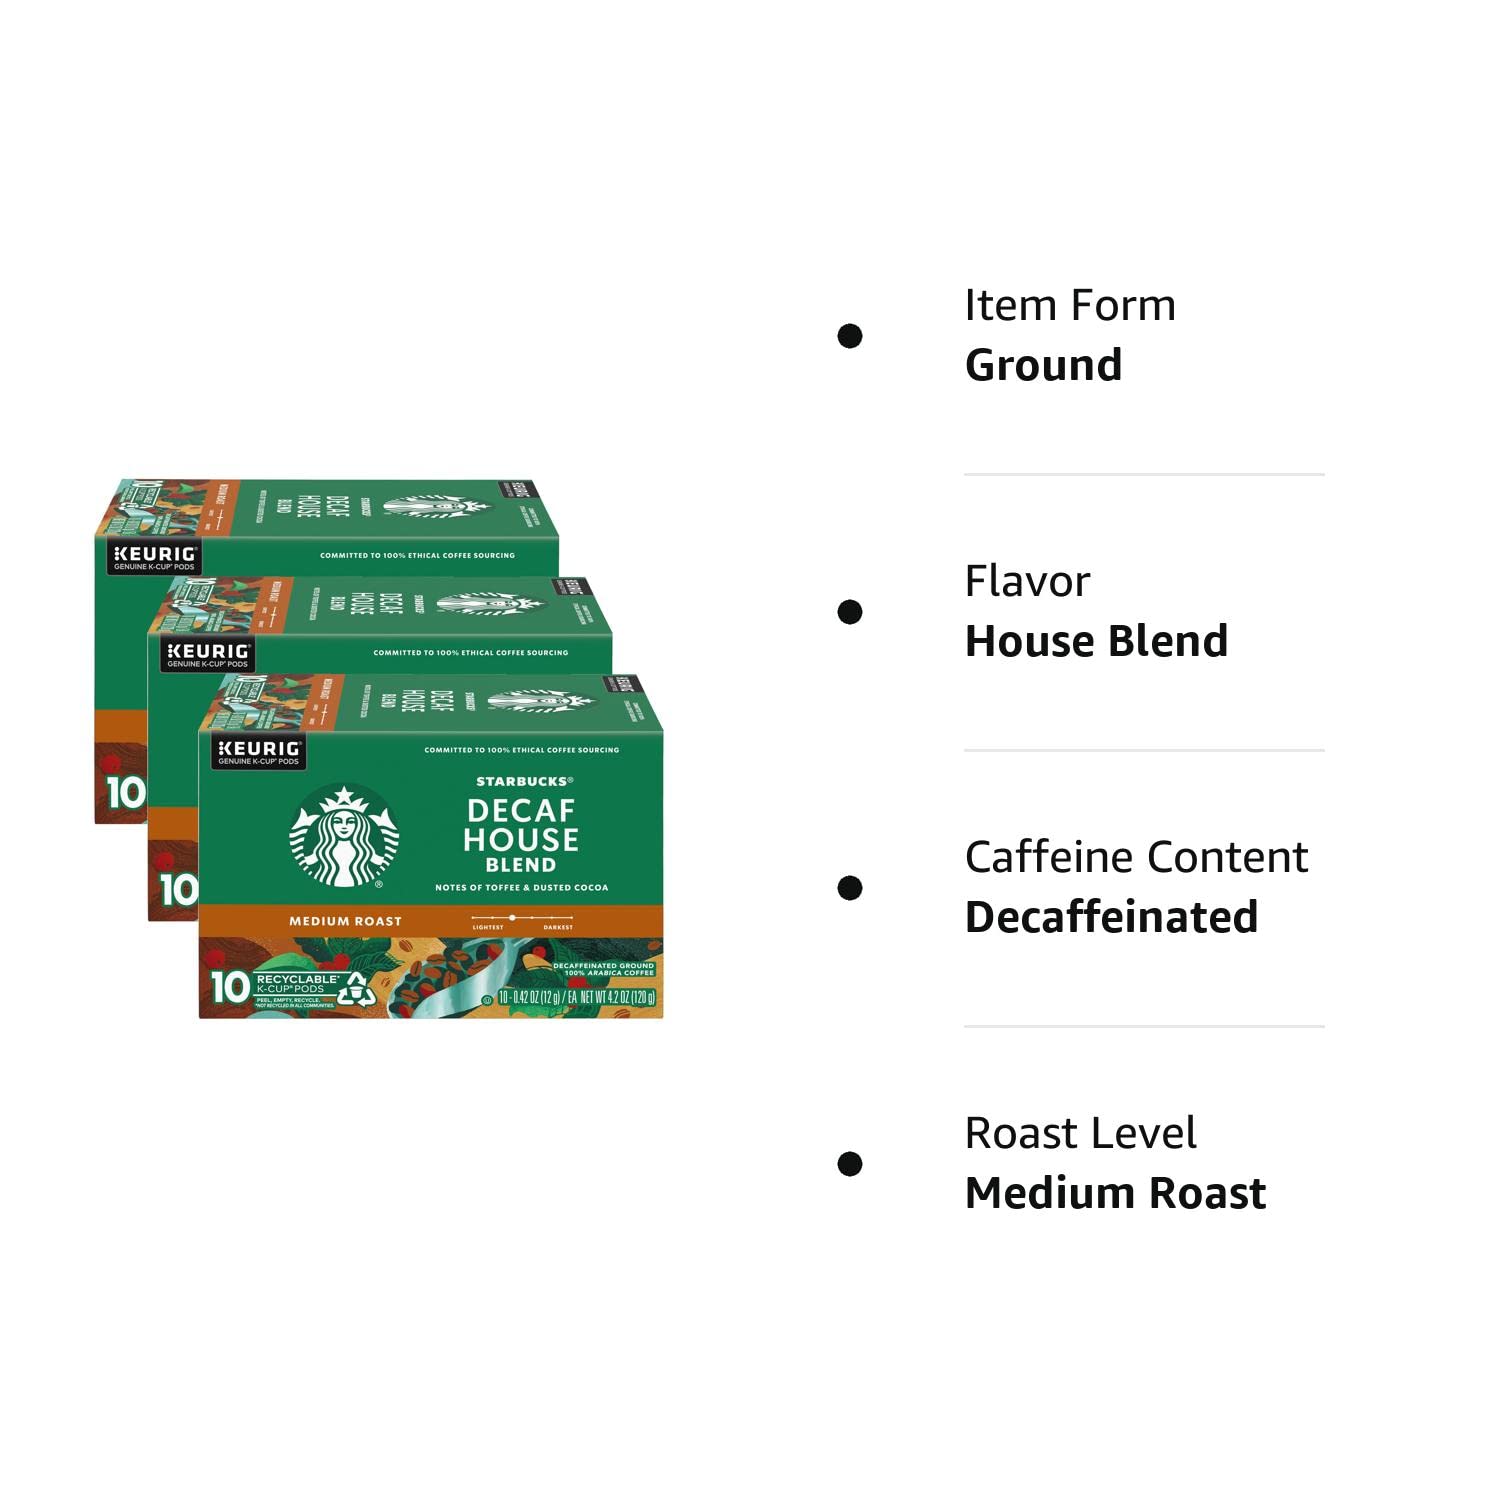 Starbucks Decaf House Blend Coffee K-Cup Pods, Medium Roast Decaffeinated Ground Coffee K-Cups for Keurig Brewing System, 10 CT K-Cups/Box (Pack of 3 Boxes)